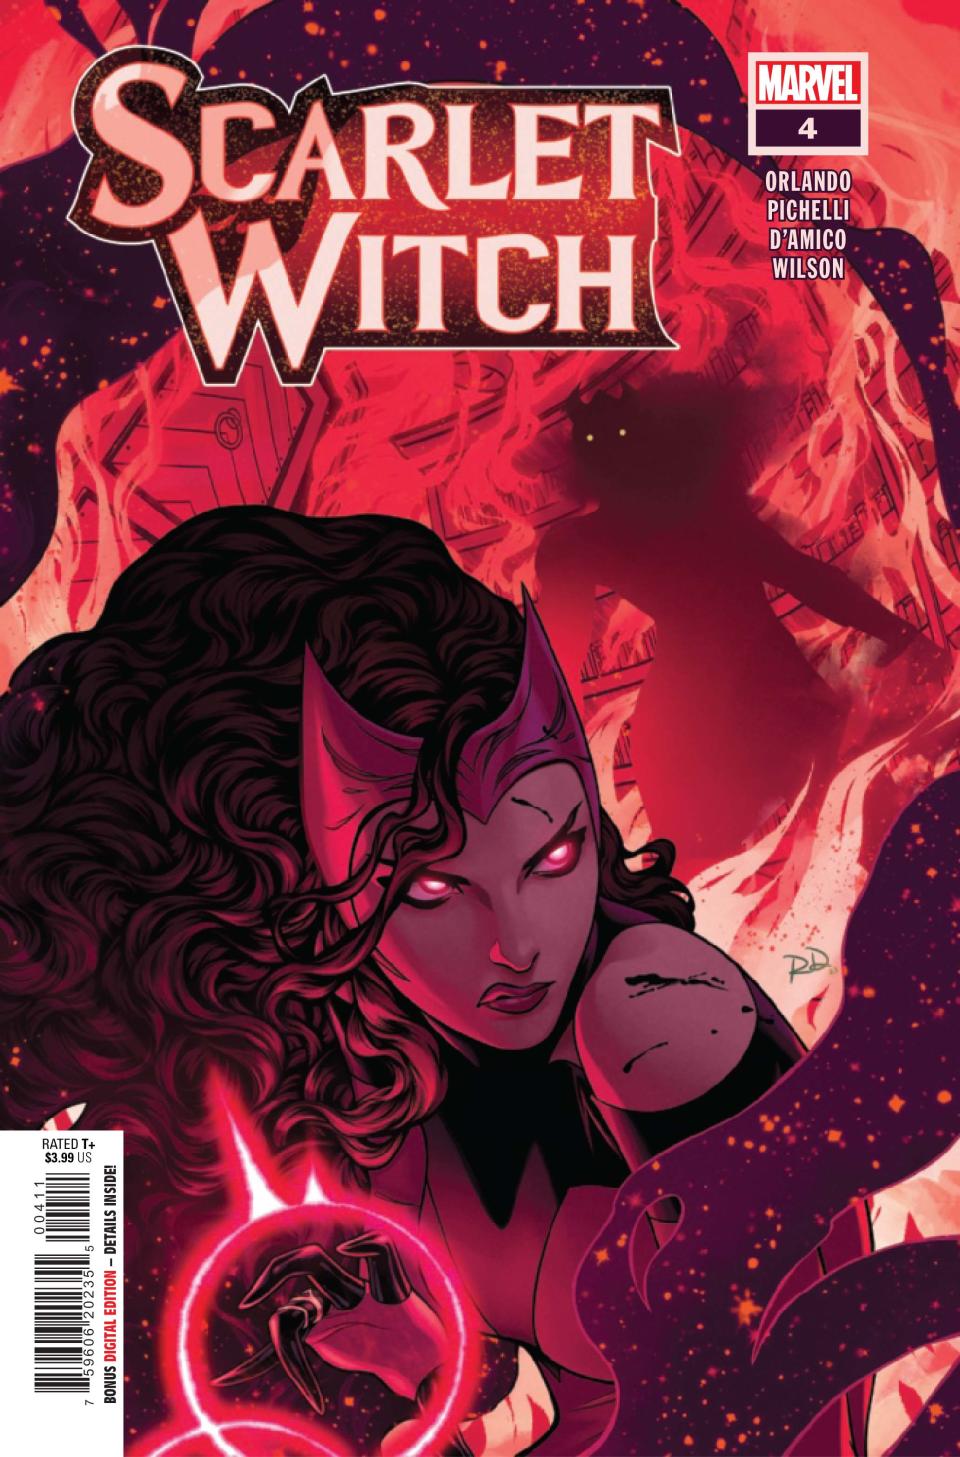 Cover for Scarlet Witch #4 with Wanda staring out at the reader.